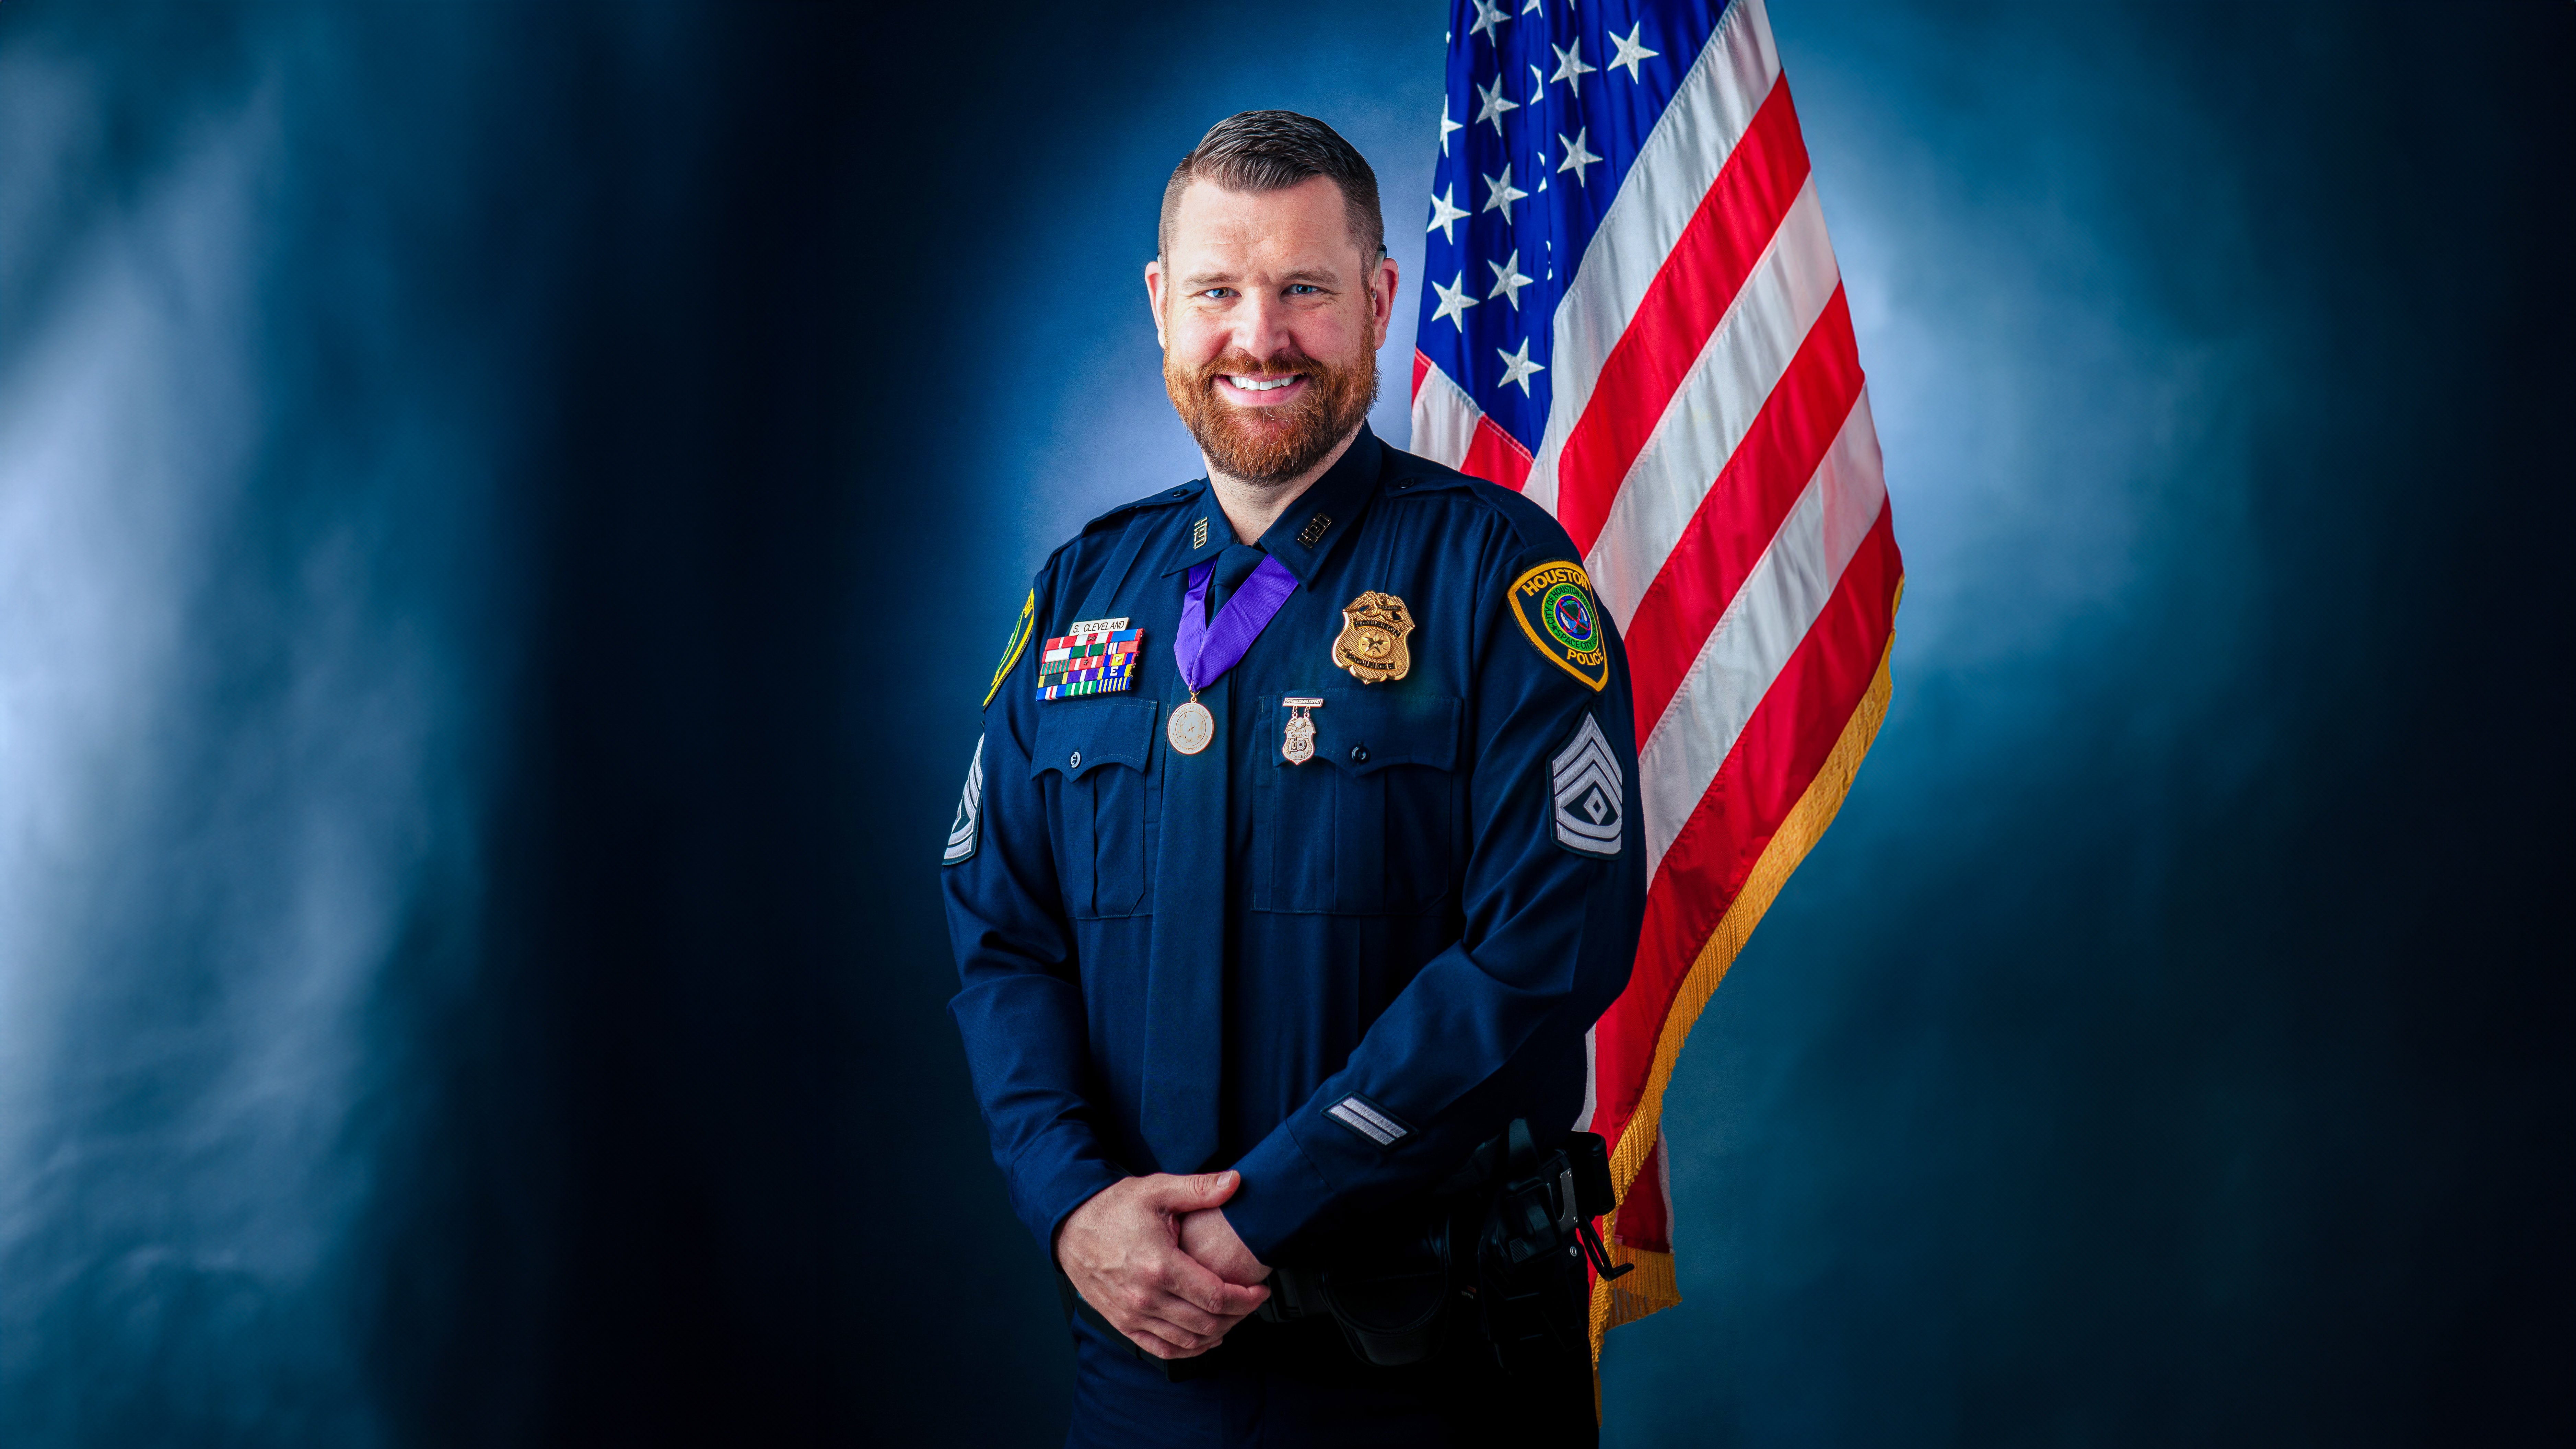 Sgt. Sam Cleveland was determined to get back to work after gunshots could have sidelined his career as a Houston police officer. (Photo courtesy of Houston Police Department)